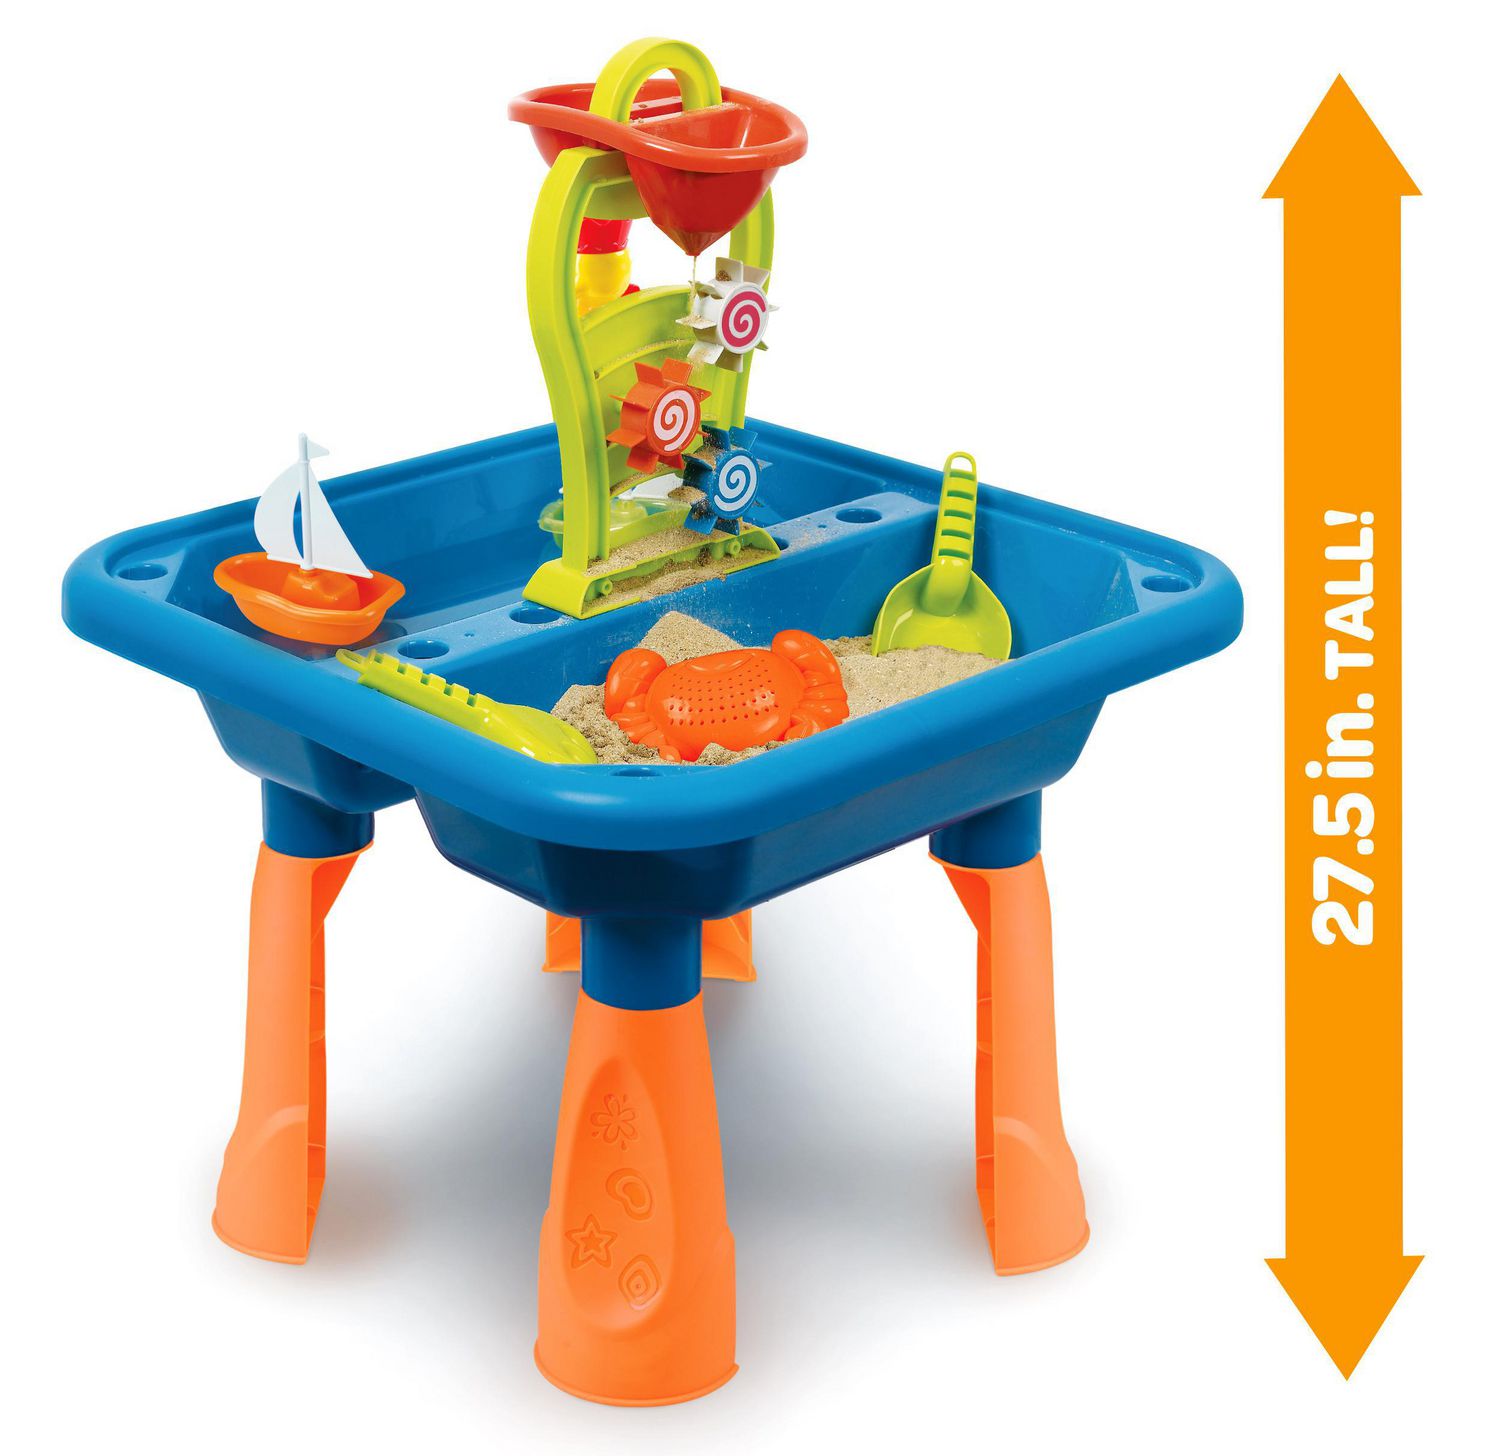 Play Day Sand And Water Table Outdoor Toys 16 Pieces | Walmart Canada